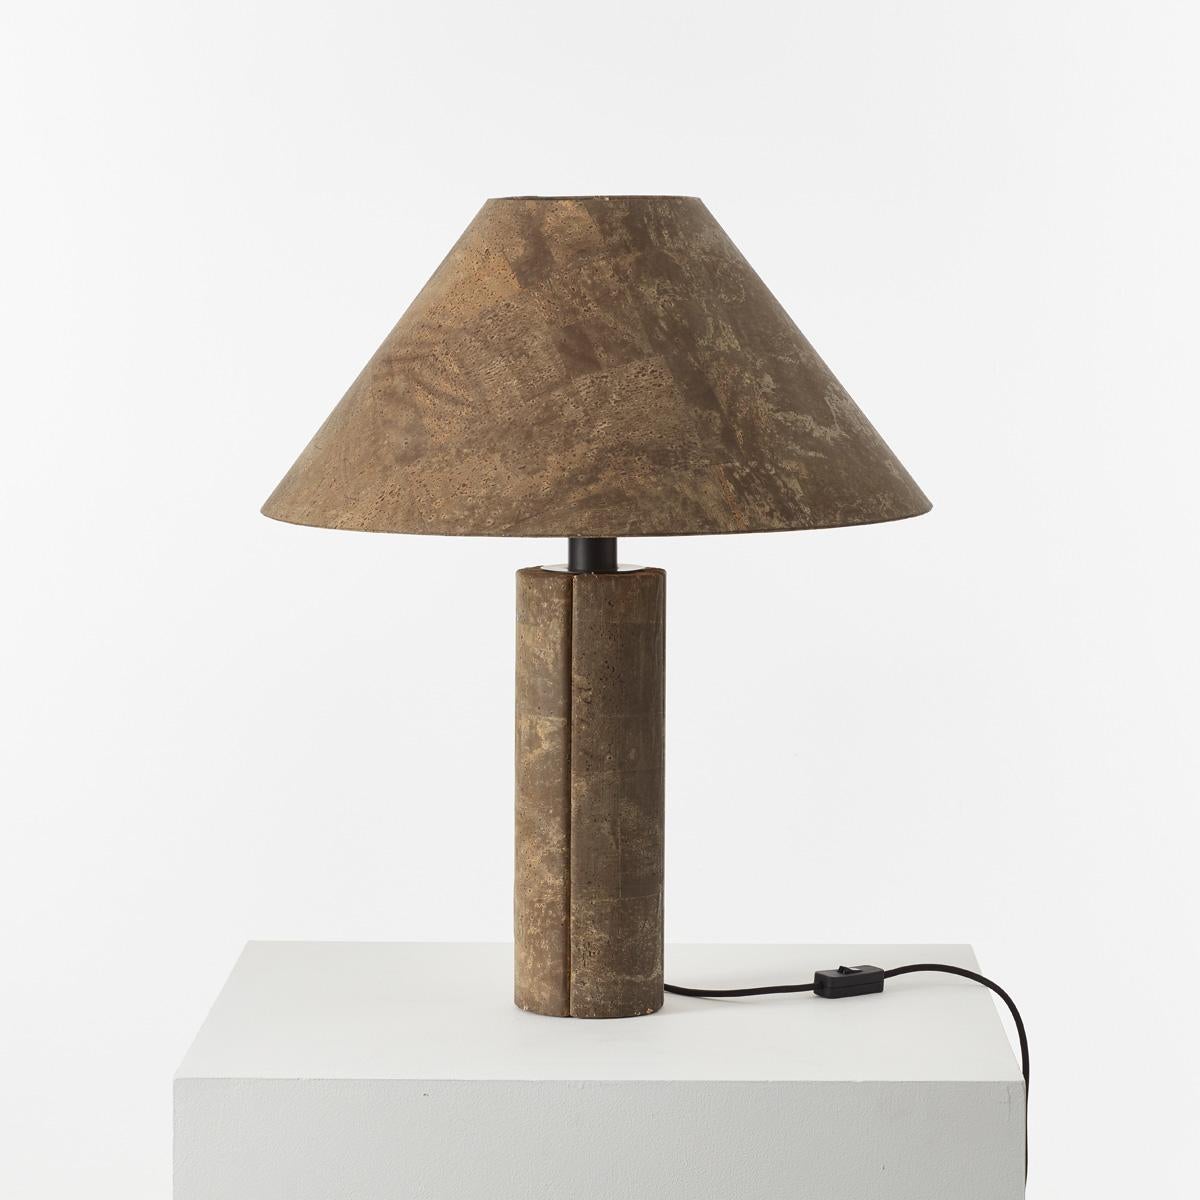 Late 20th Century Pair of Ingo Maurer Cork Lamps for Design M, Germany 1974 For Sale